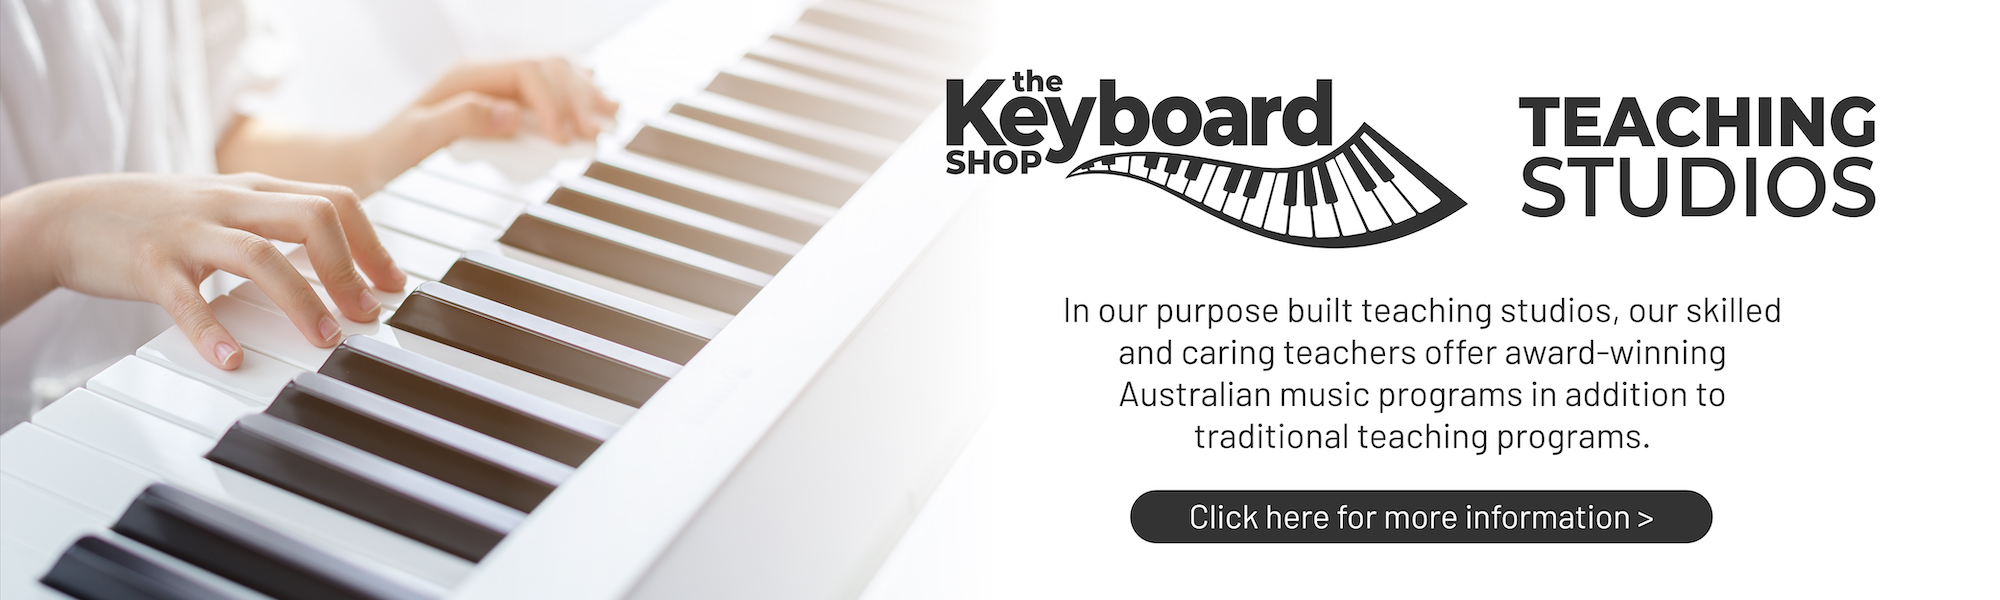 the keyboard shop teaching studios piano lessons Townsville